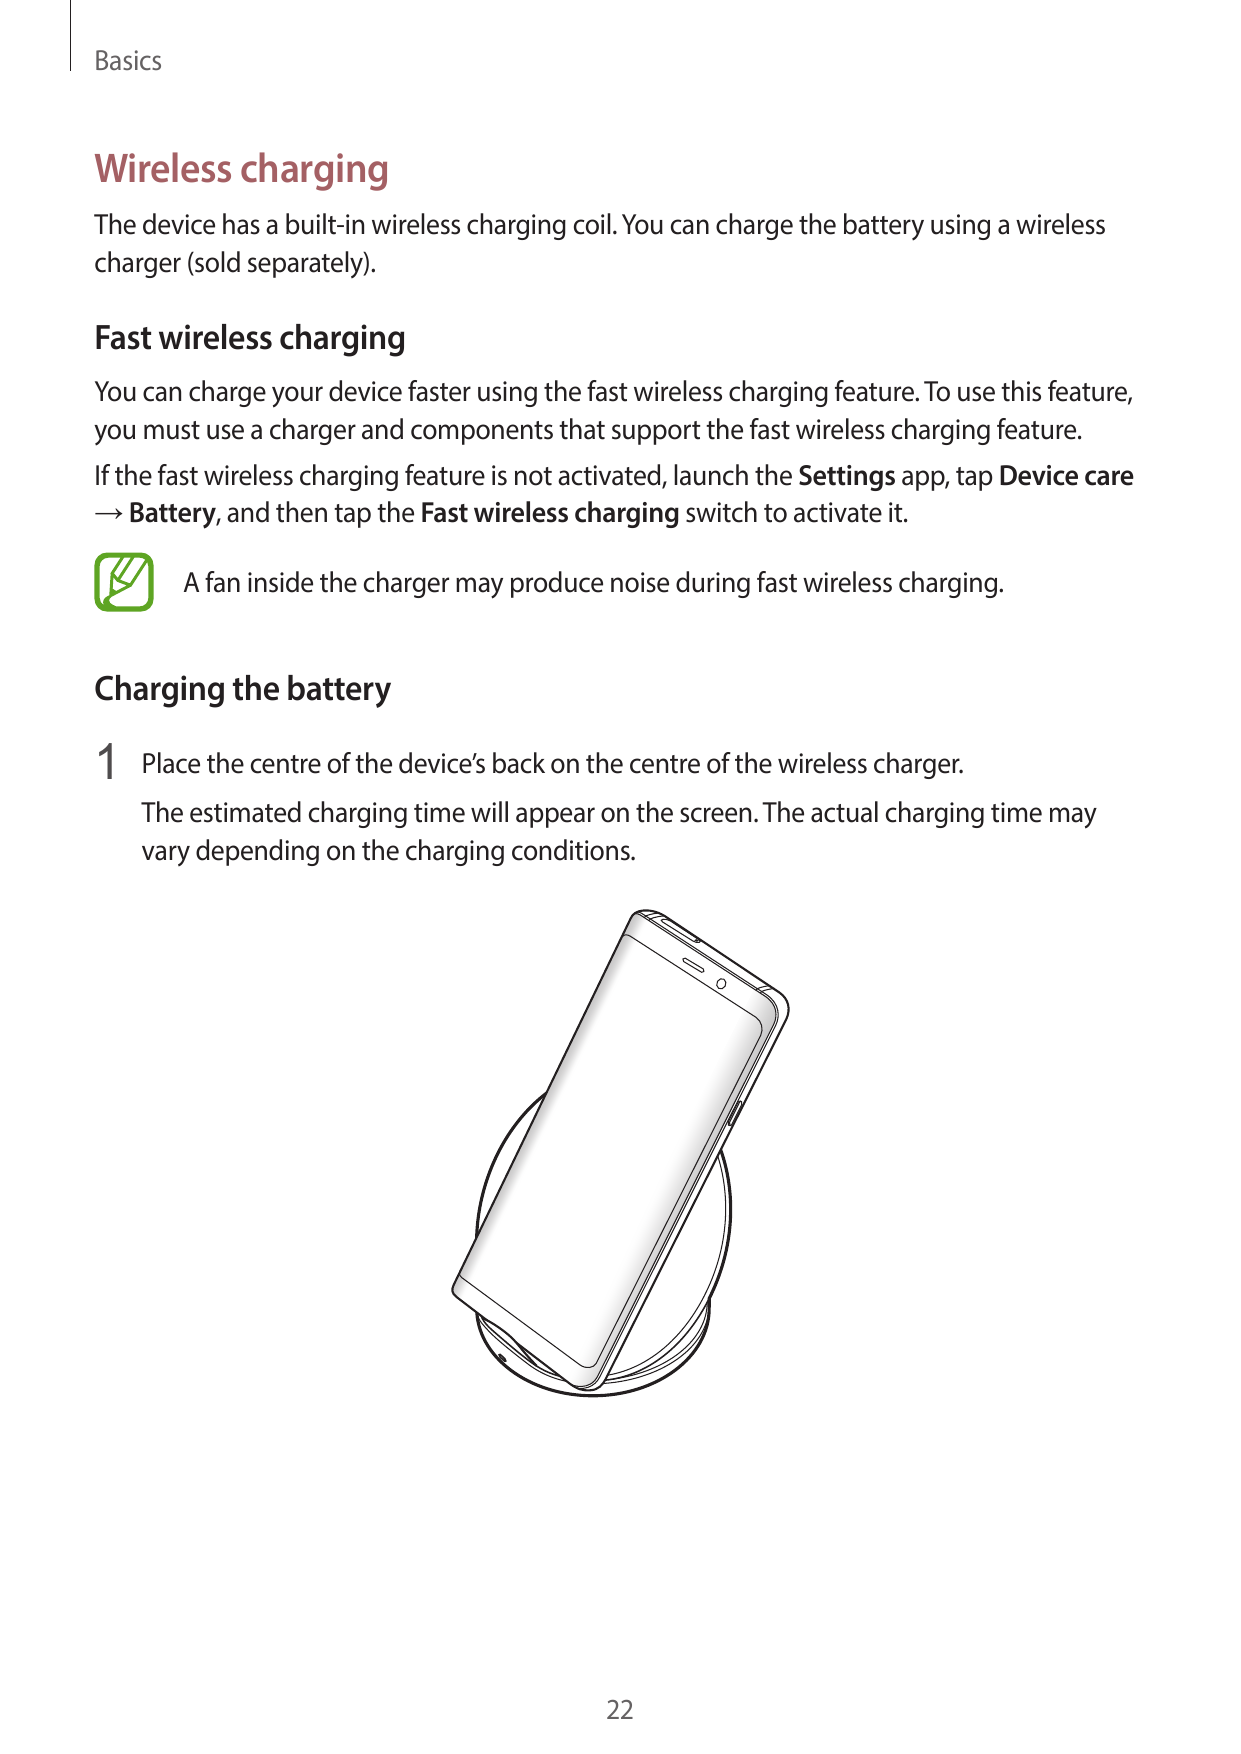 BasicsWireless chargingThe device has a built-in wireless charging coil. You can charge the battery using a wirelesscharger (sol